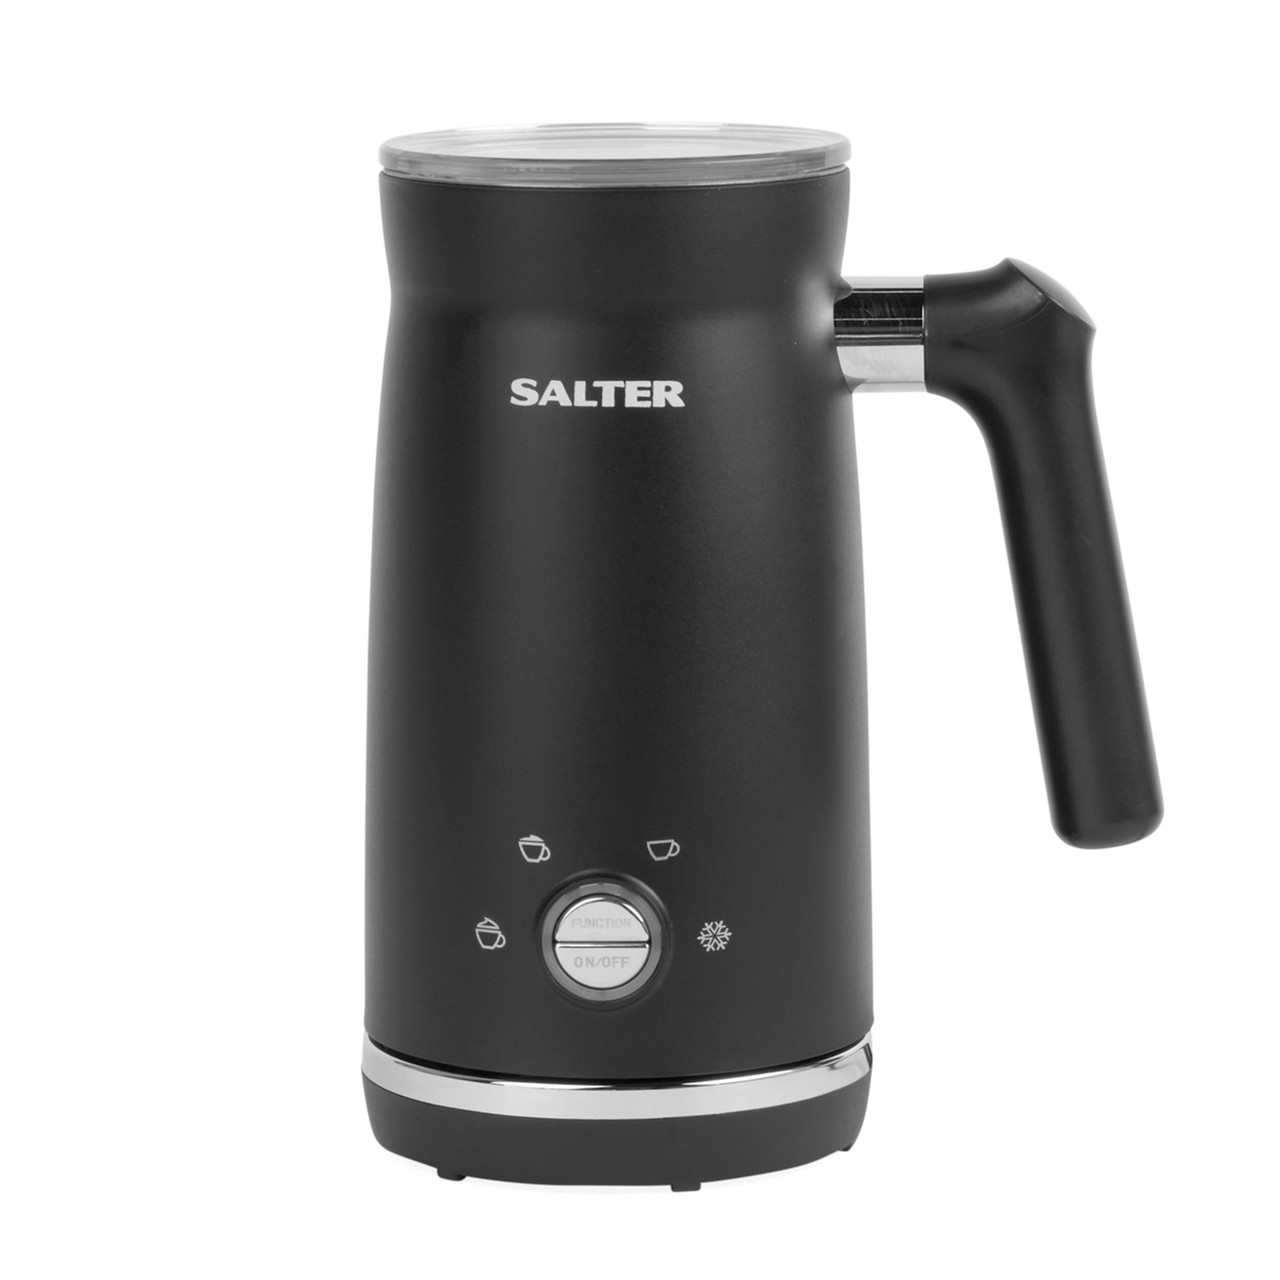 Salter Electric Milk Frother Steamer for Dairy/Plant-Based, Hot Chocolate, Cappuccinos, Lattes, Includes Hot, Cold and Frothy Functions